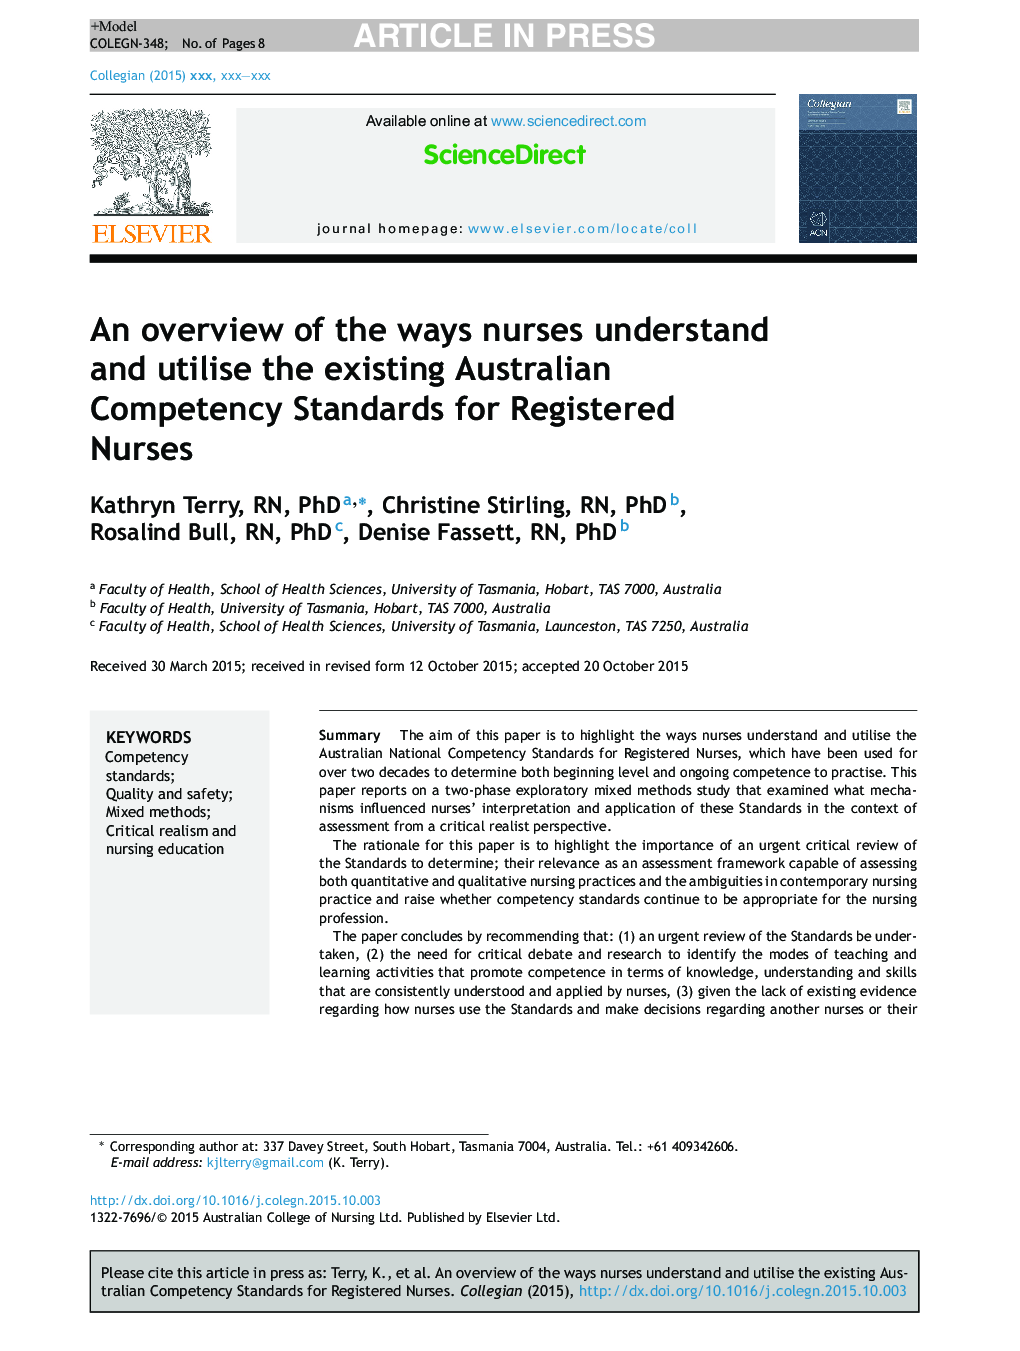 An overview of the ways nurses understand and utilise the existing Australian Competency Standards for Registered Nurses